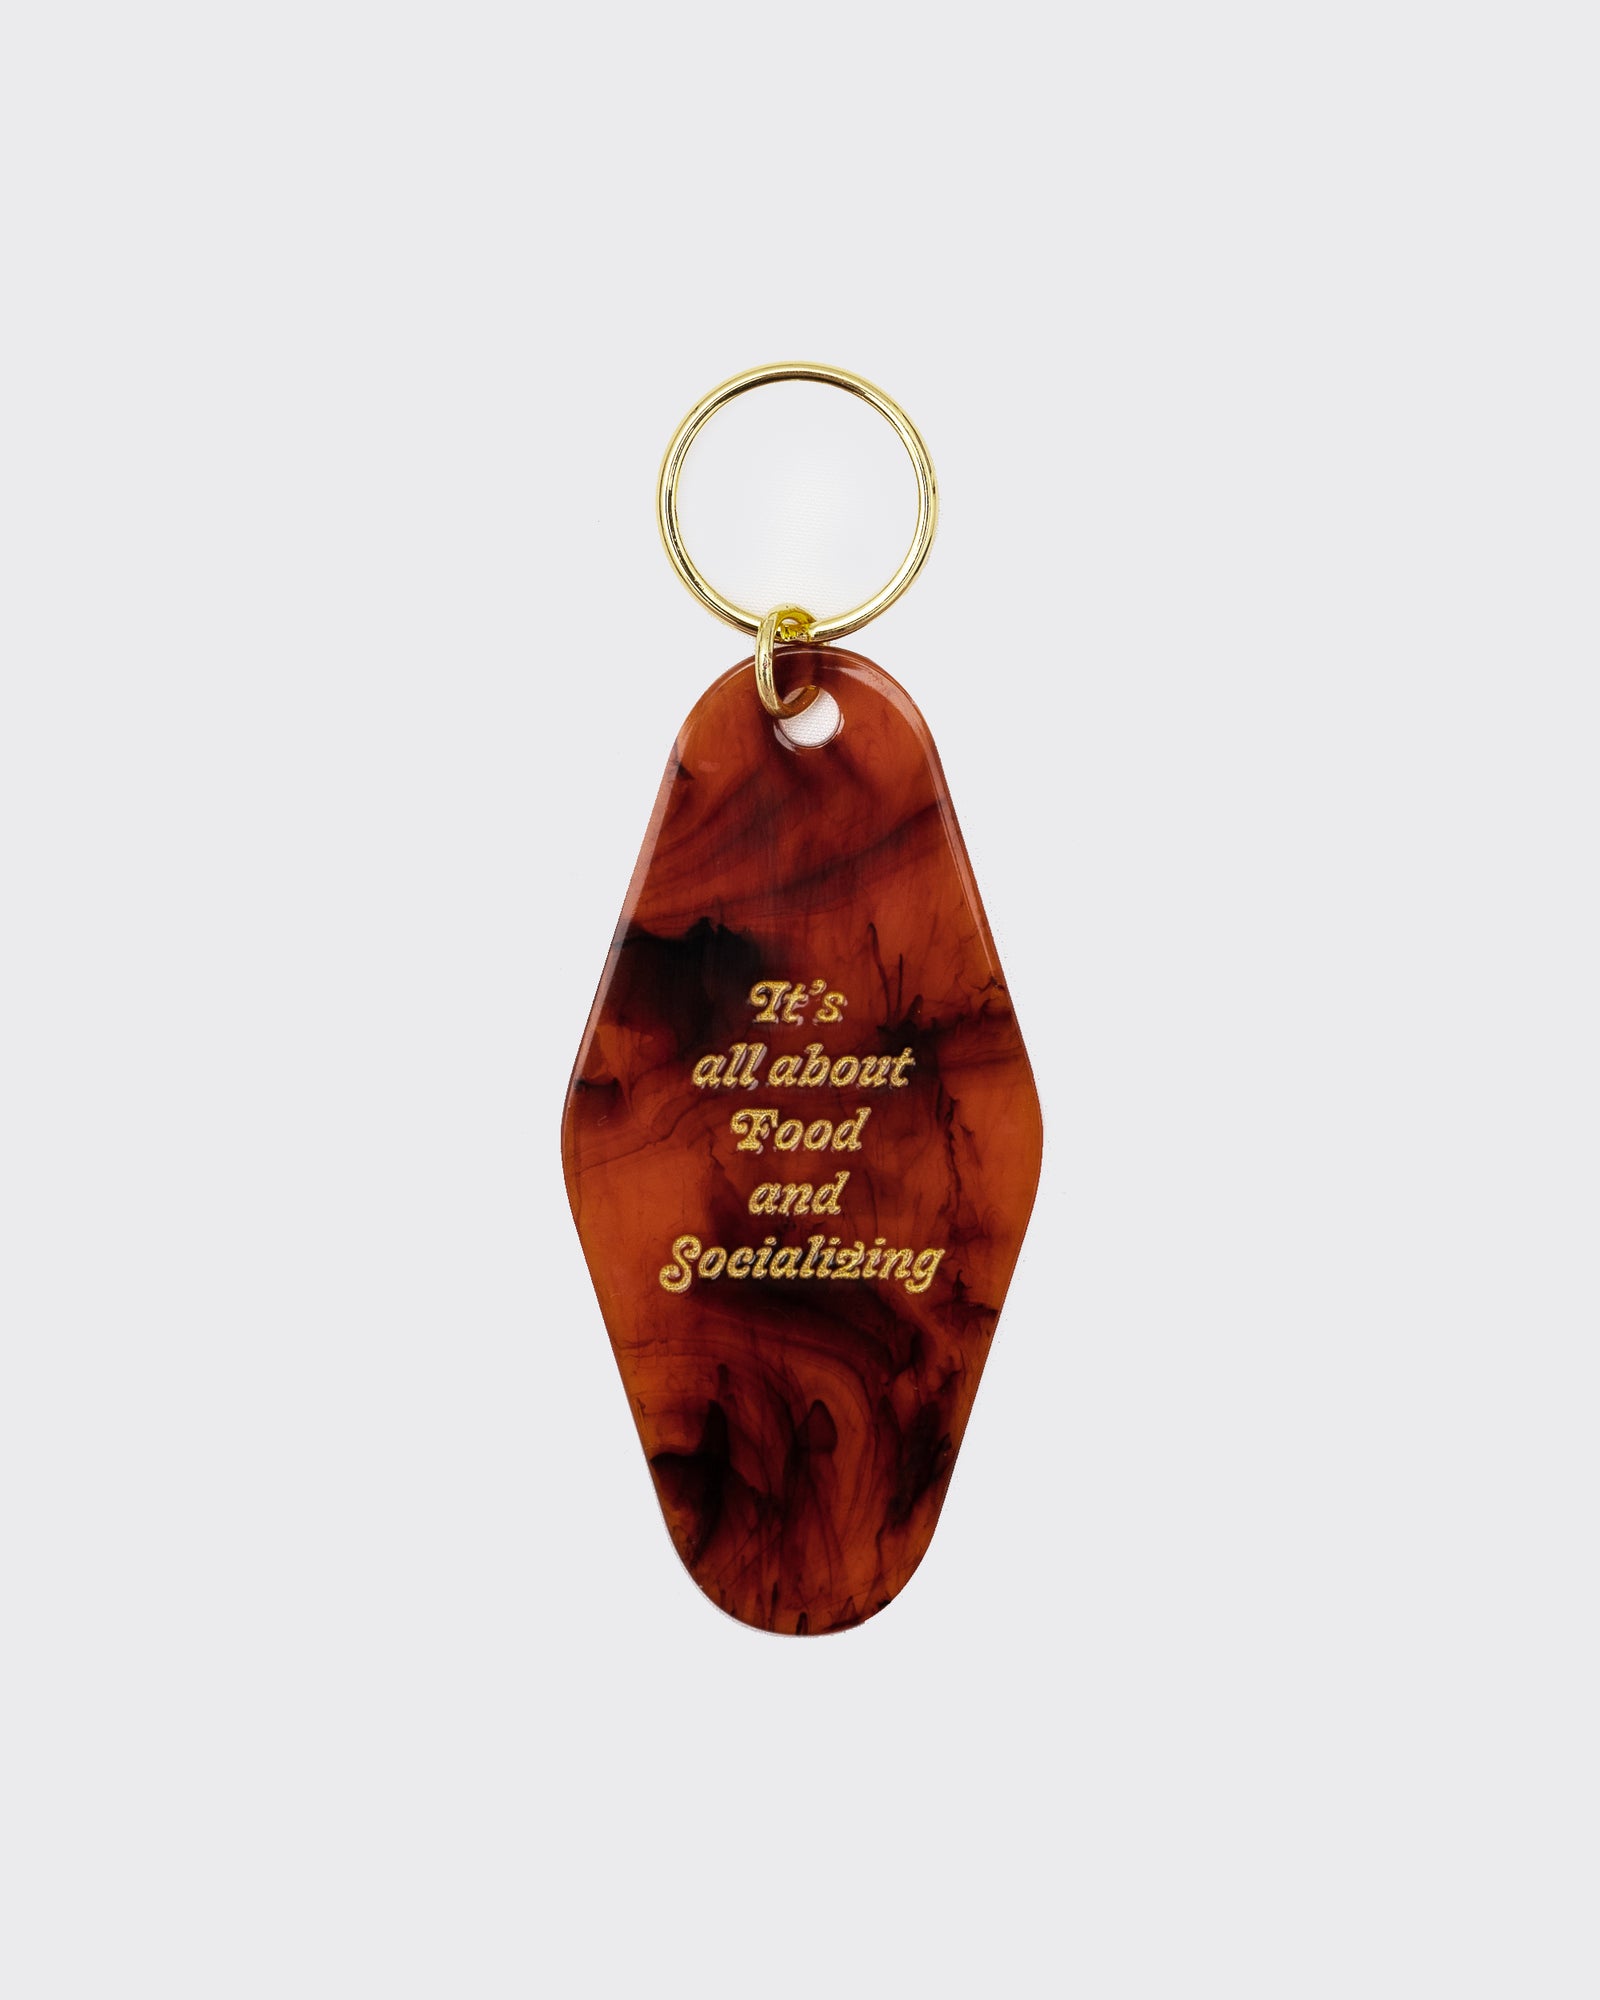 Reception - Accessory - Food and Socializing - Key Tag - Acrylic Faux Tortoise